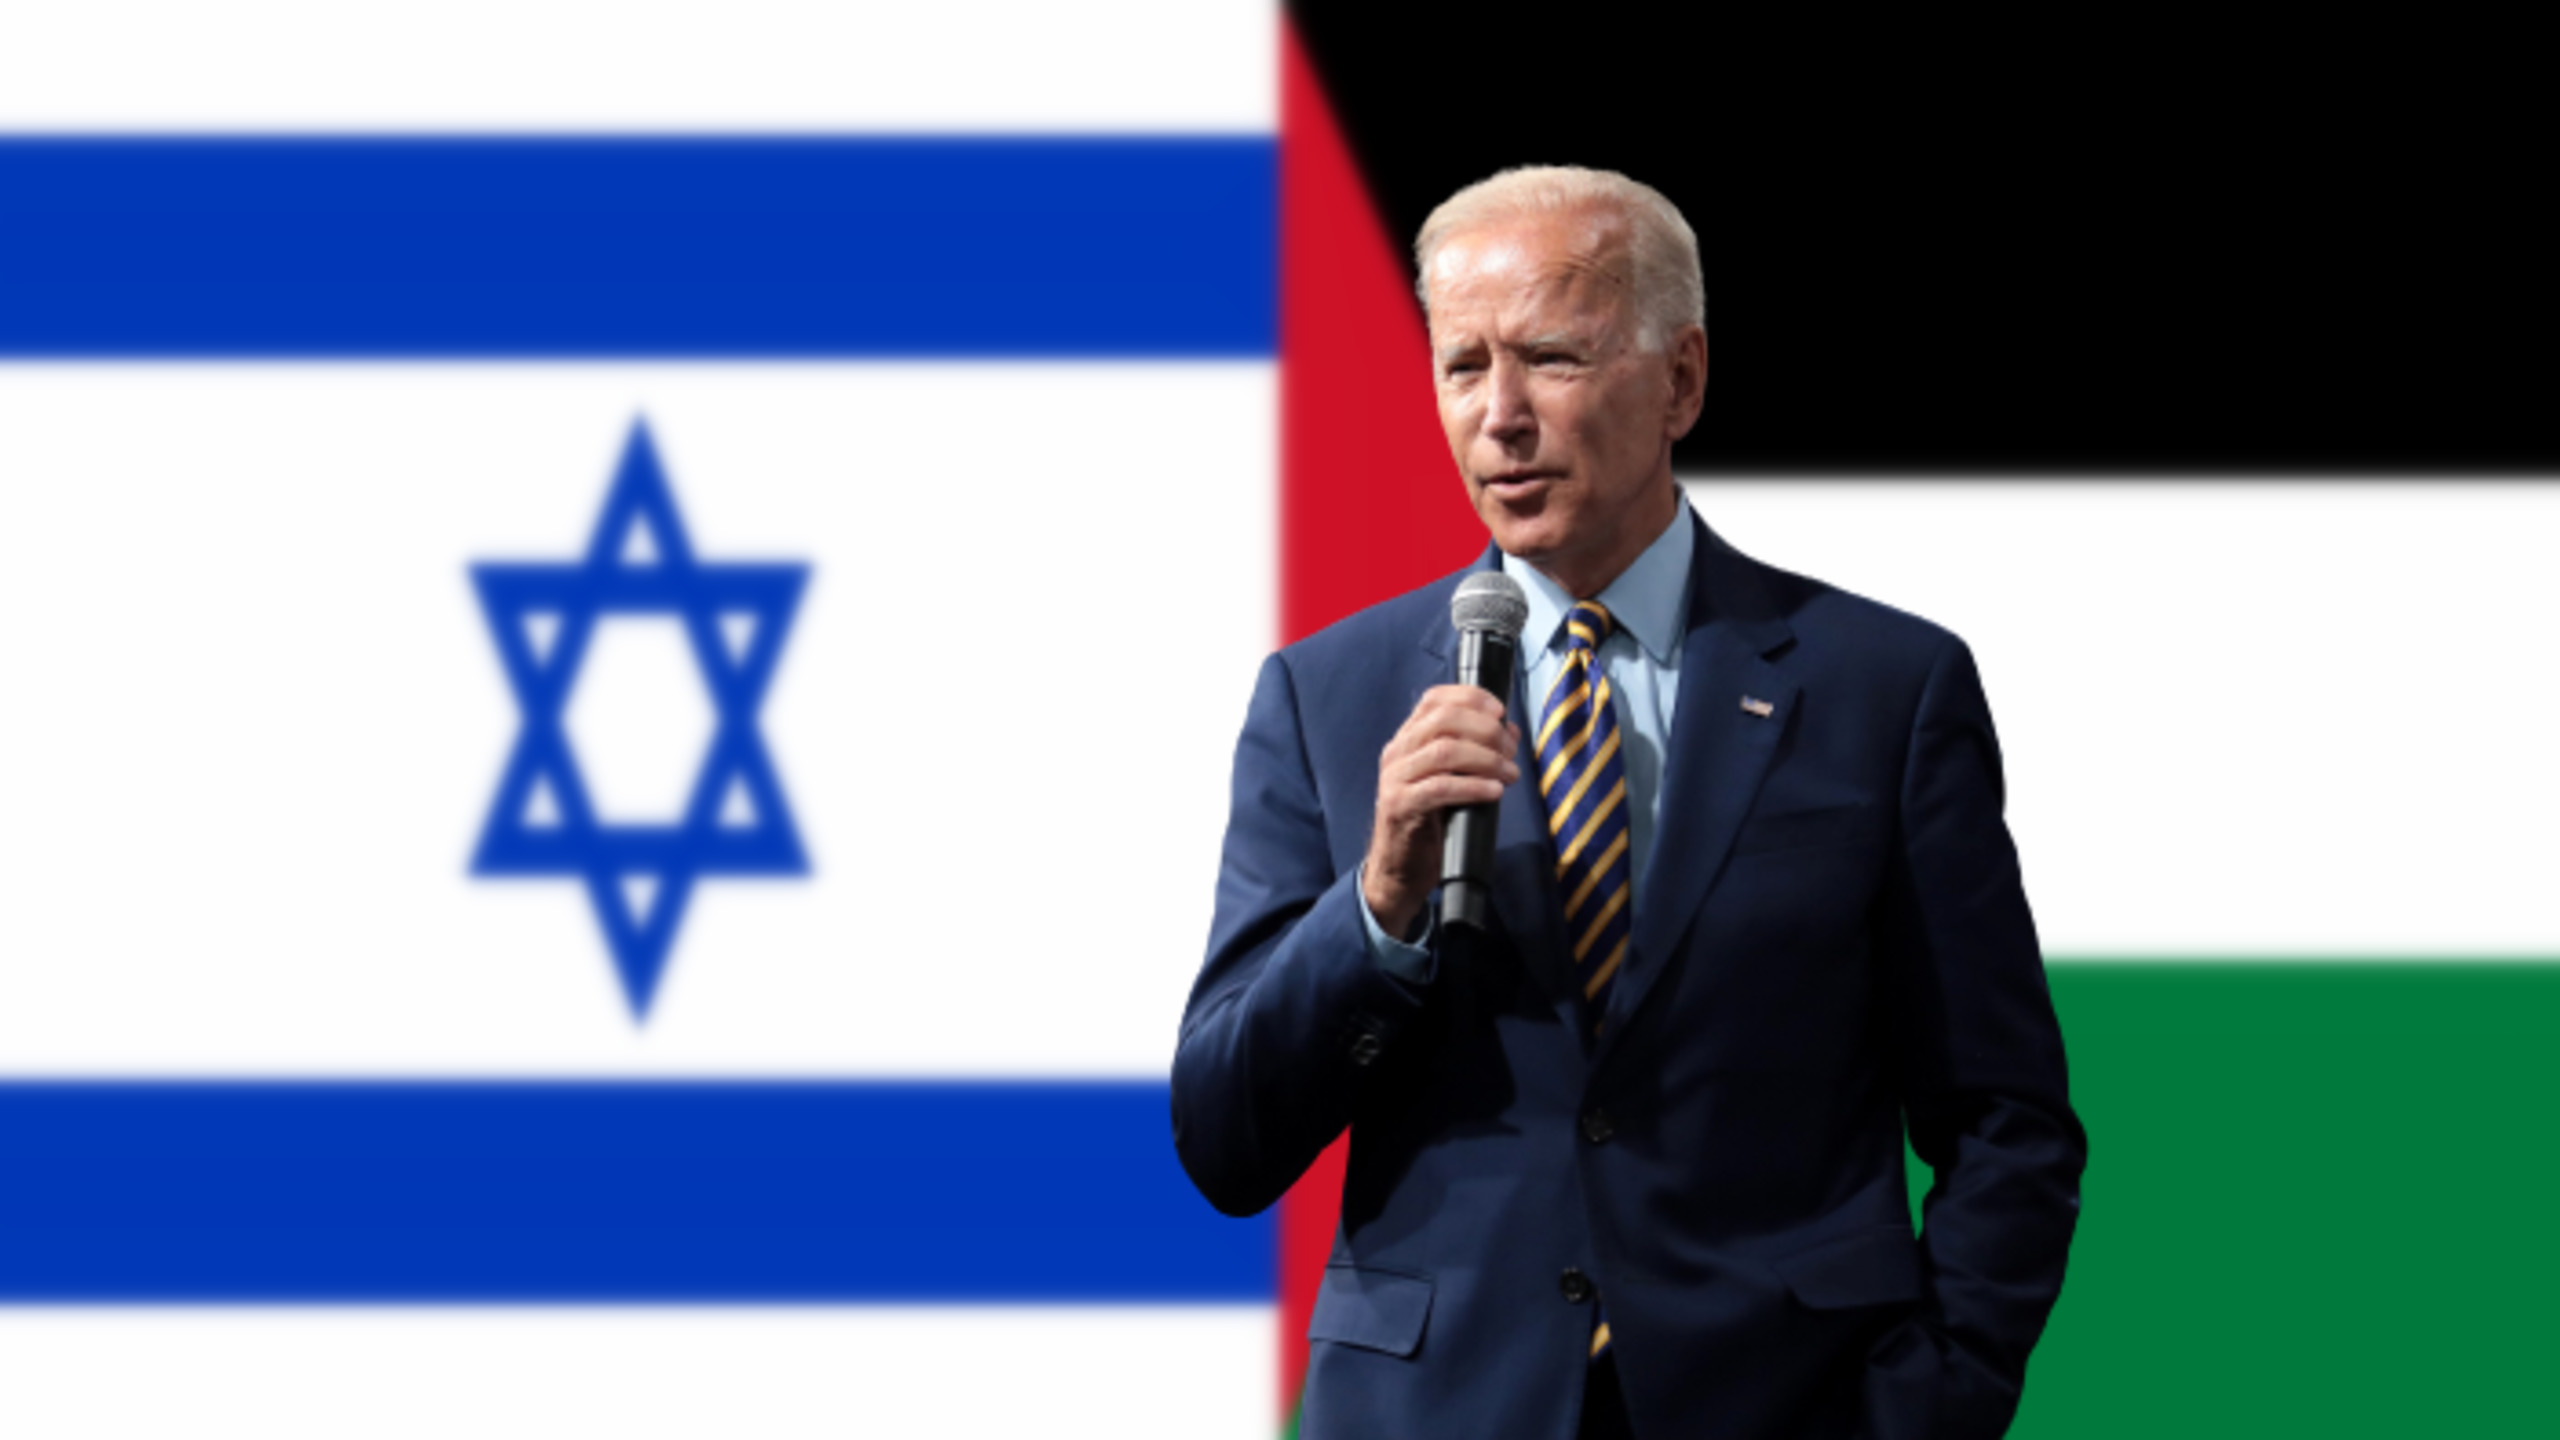 Biden’s Foreign Policy Picks Could Change Approach to Middle East